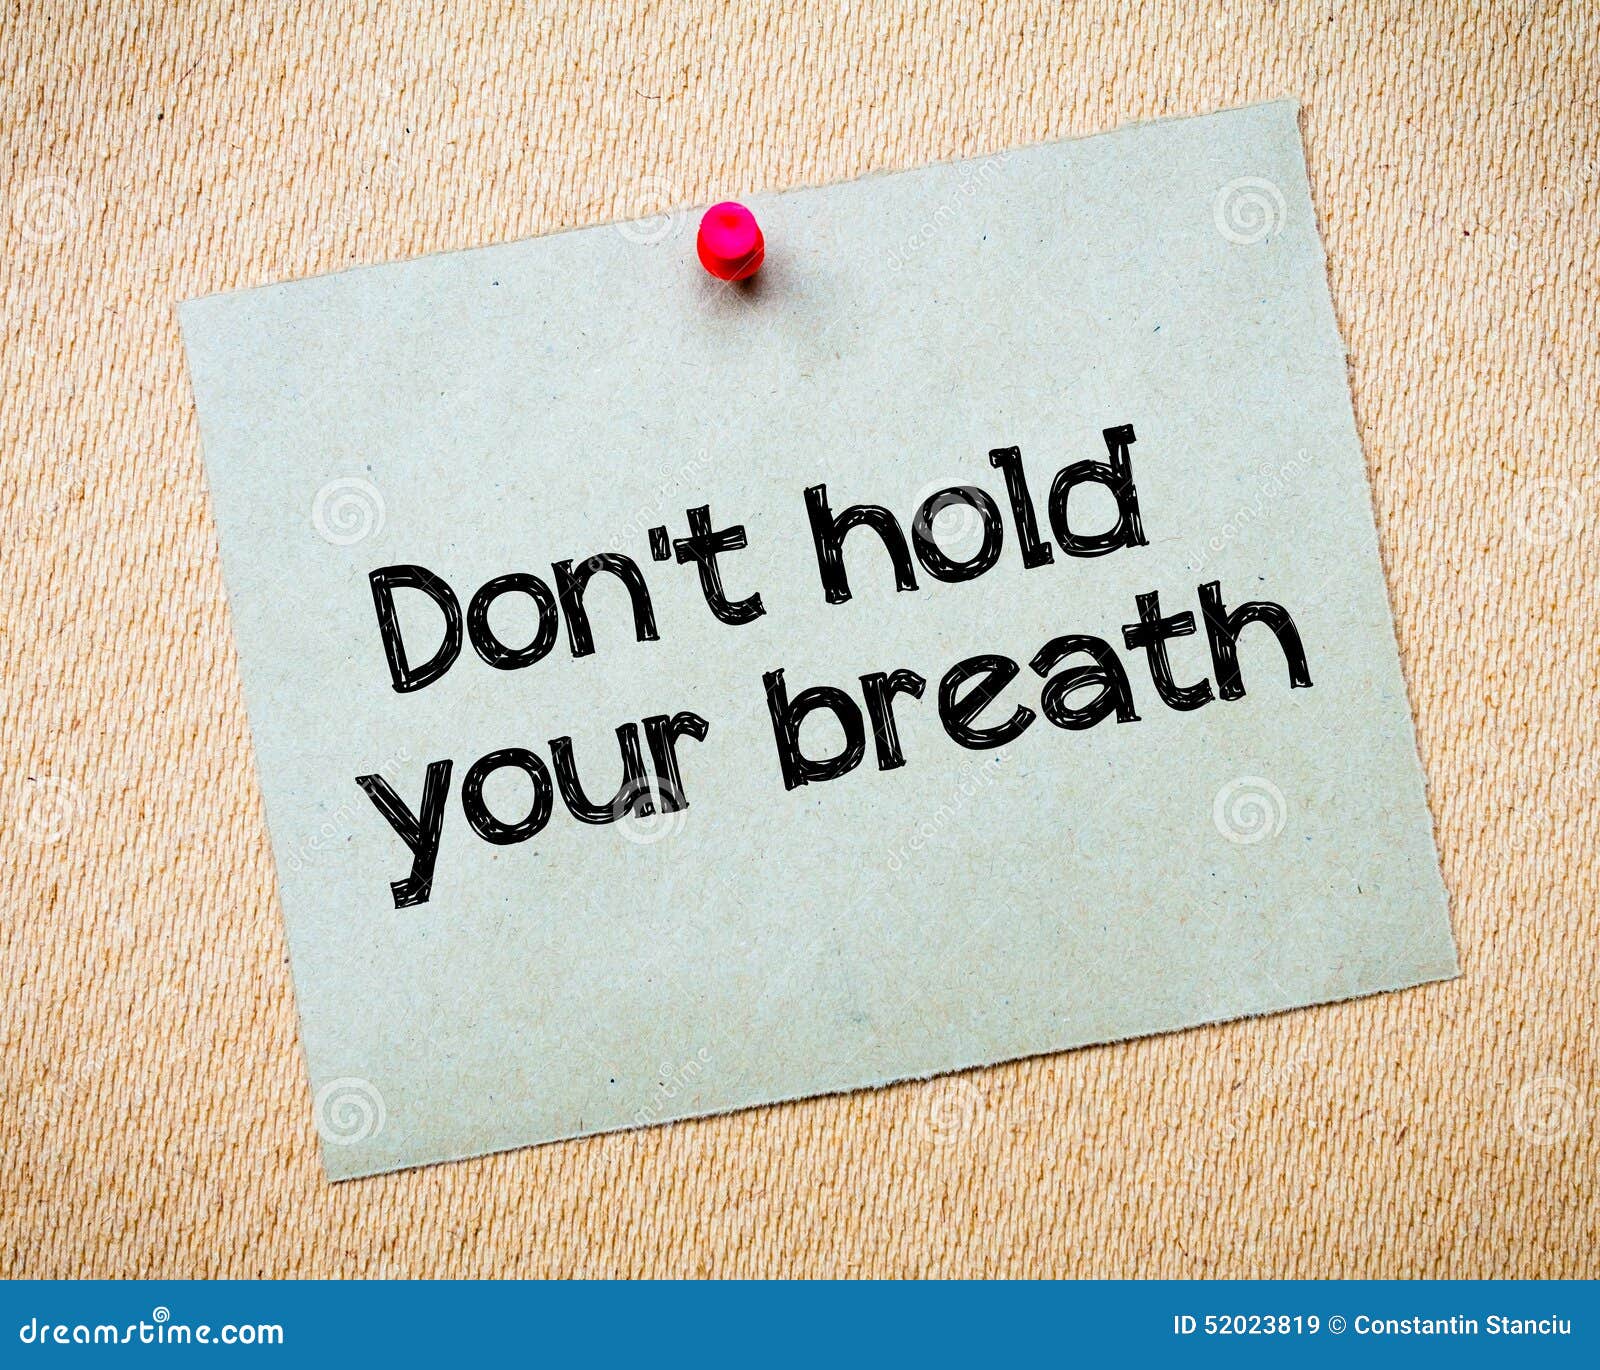 don-t-hold-your-breath-message-recycled-paper-note-pinned-cork-board-concept-image-52023819.jpg